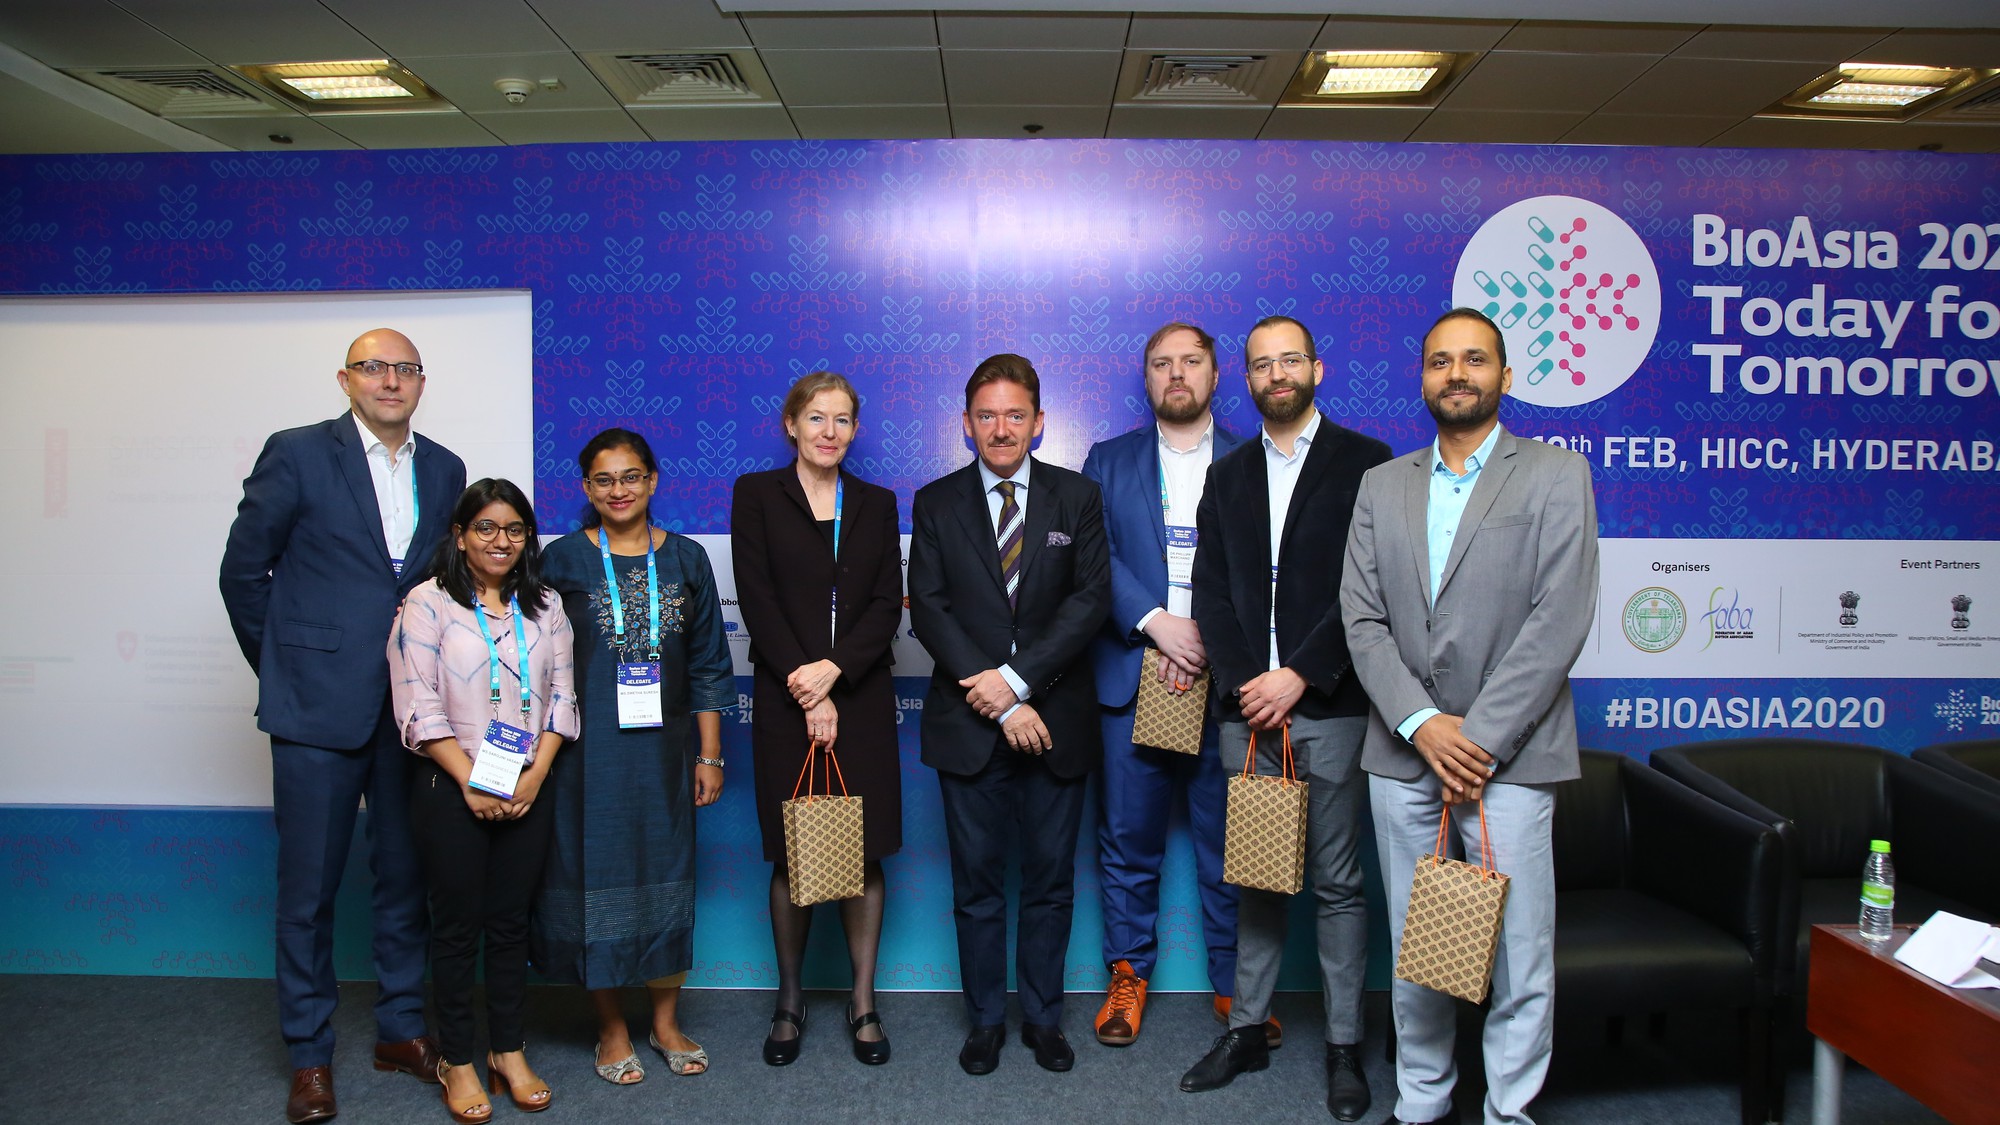 The 2020 edition of BioAsia was held in the iconic city of Hyderabad